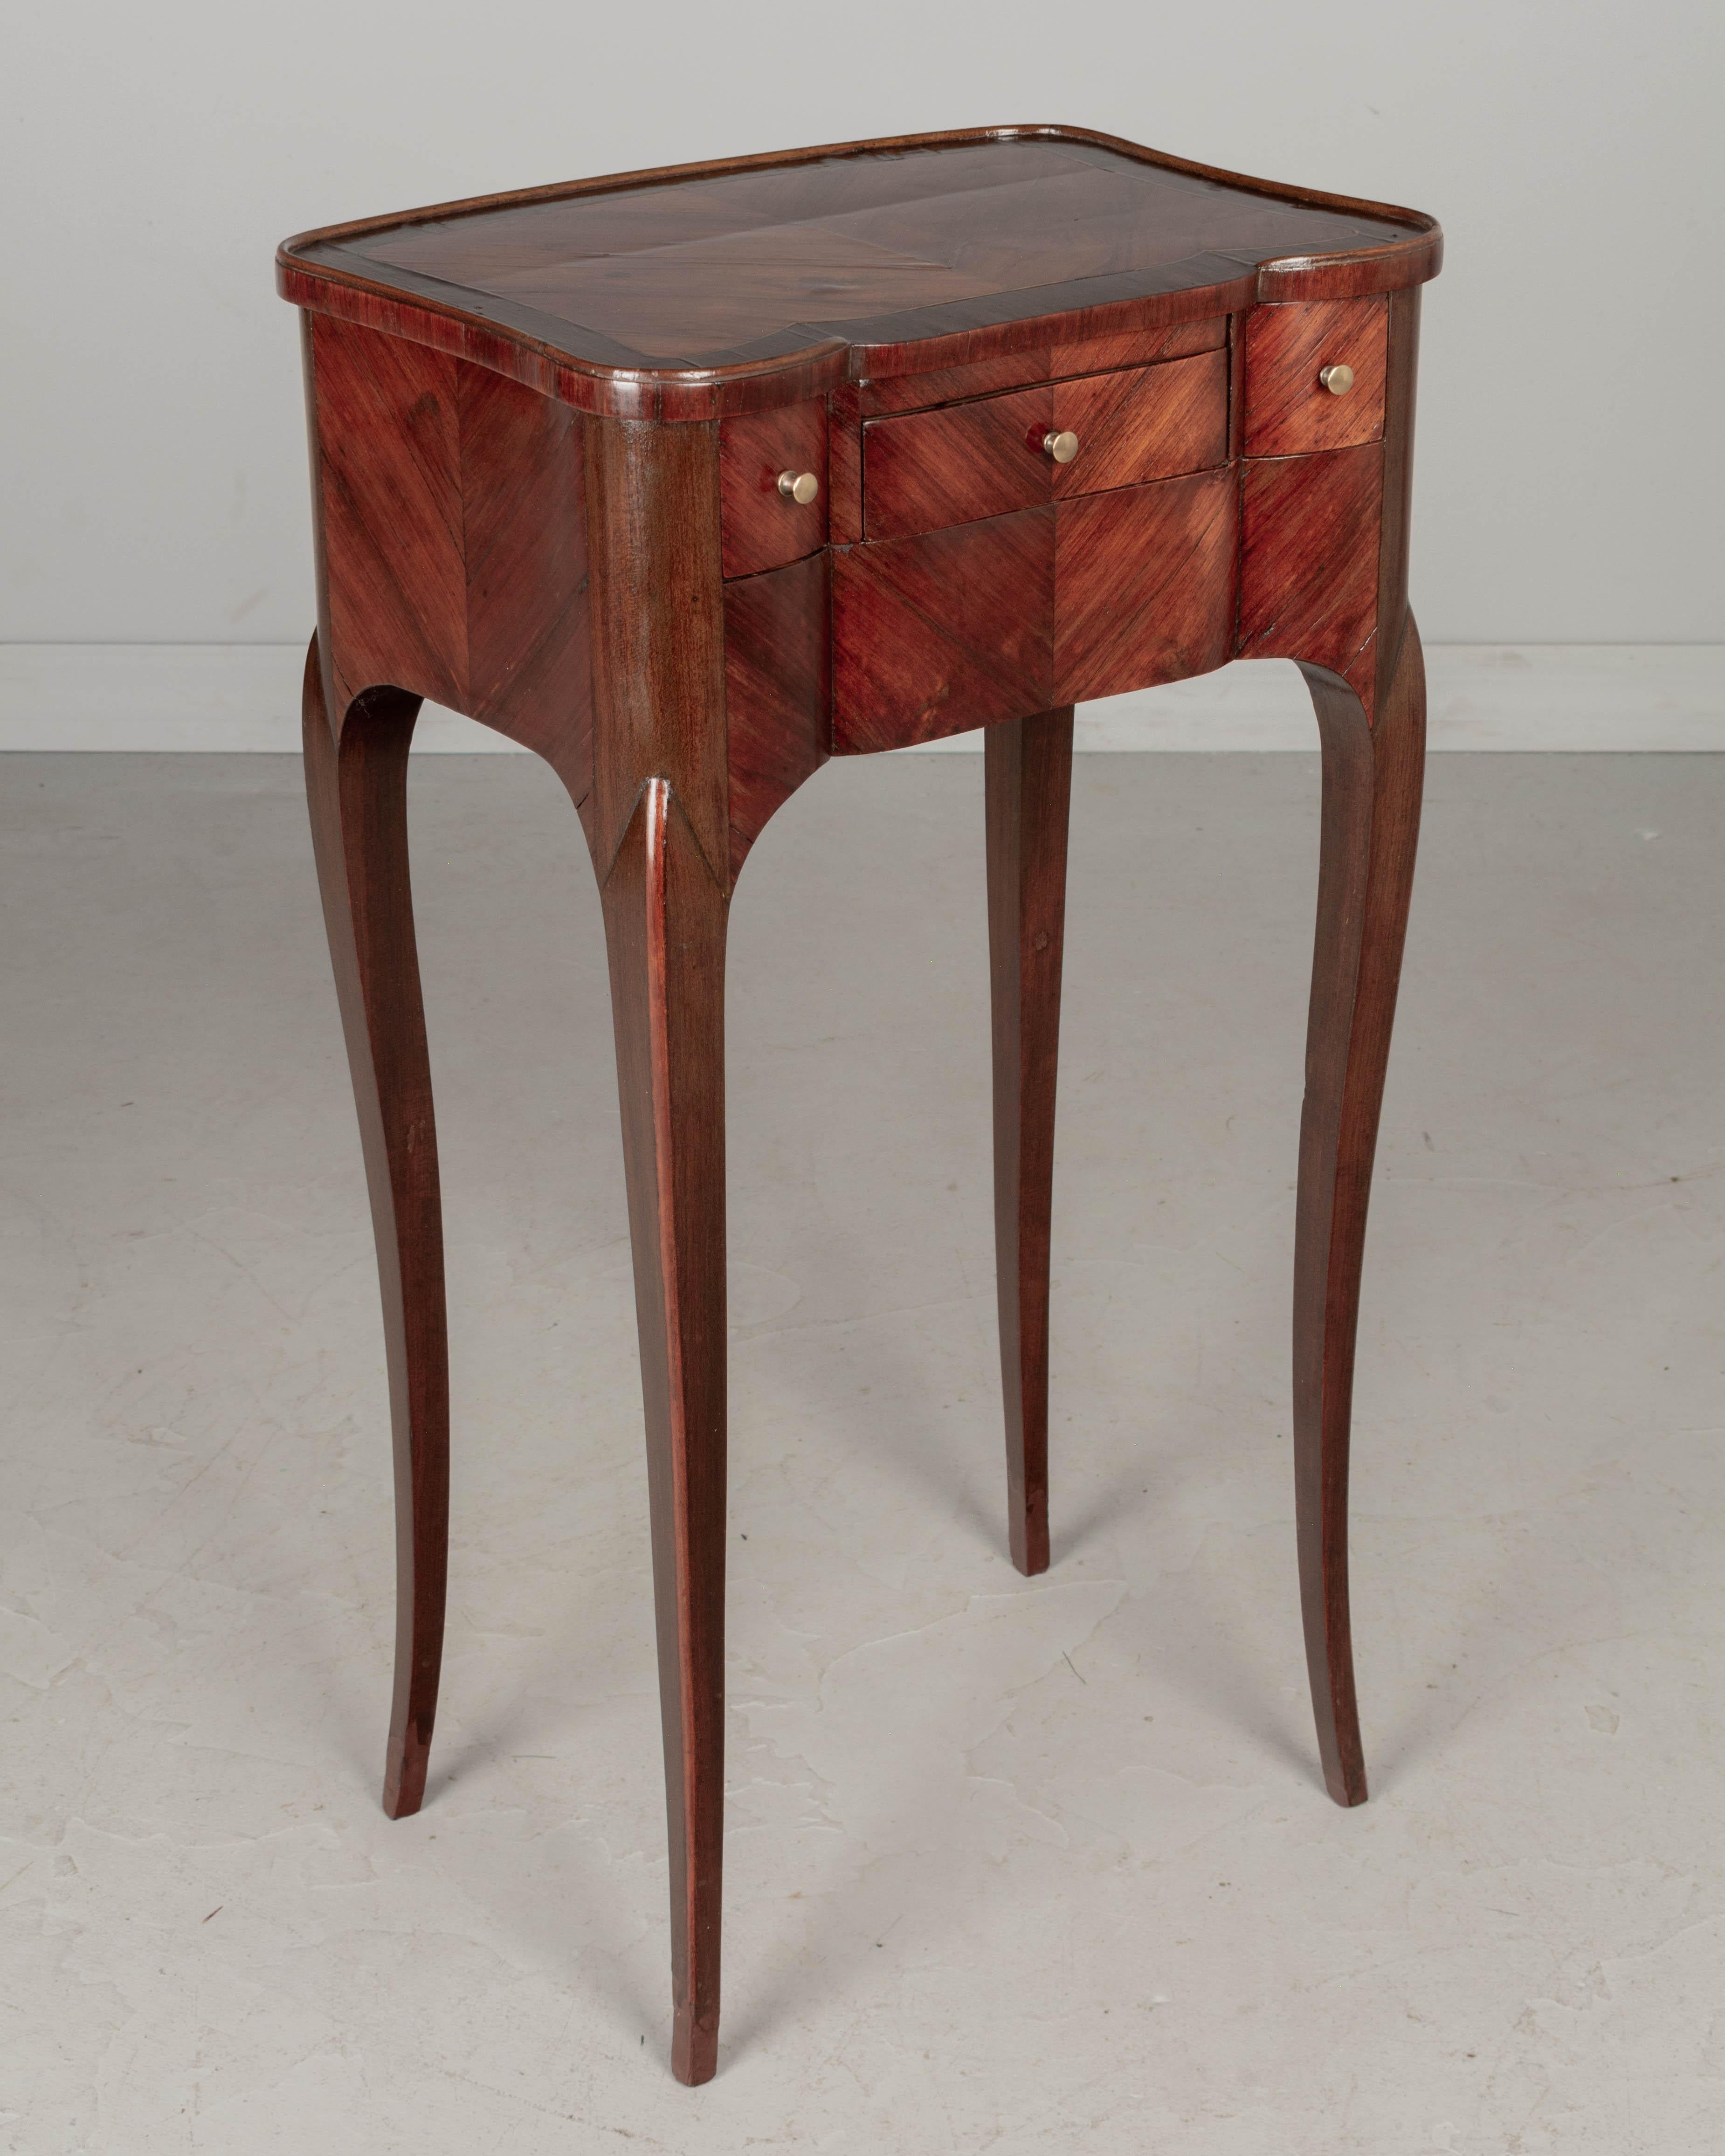 A fine 19th Century French Louis XV style marquetry side table made of bookmatched veneers of rosewood and tulipwood. Elegant proportions with tall slender legs, curved sides and shaped front. Pull-out leather writing surface or book stand that may